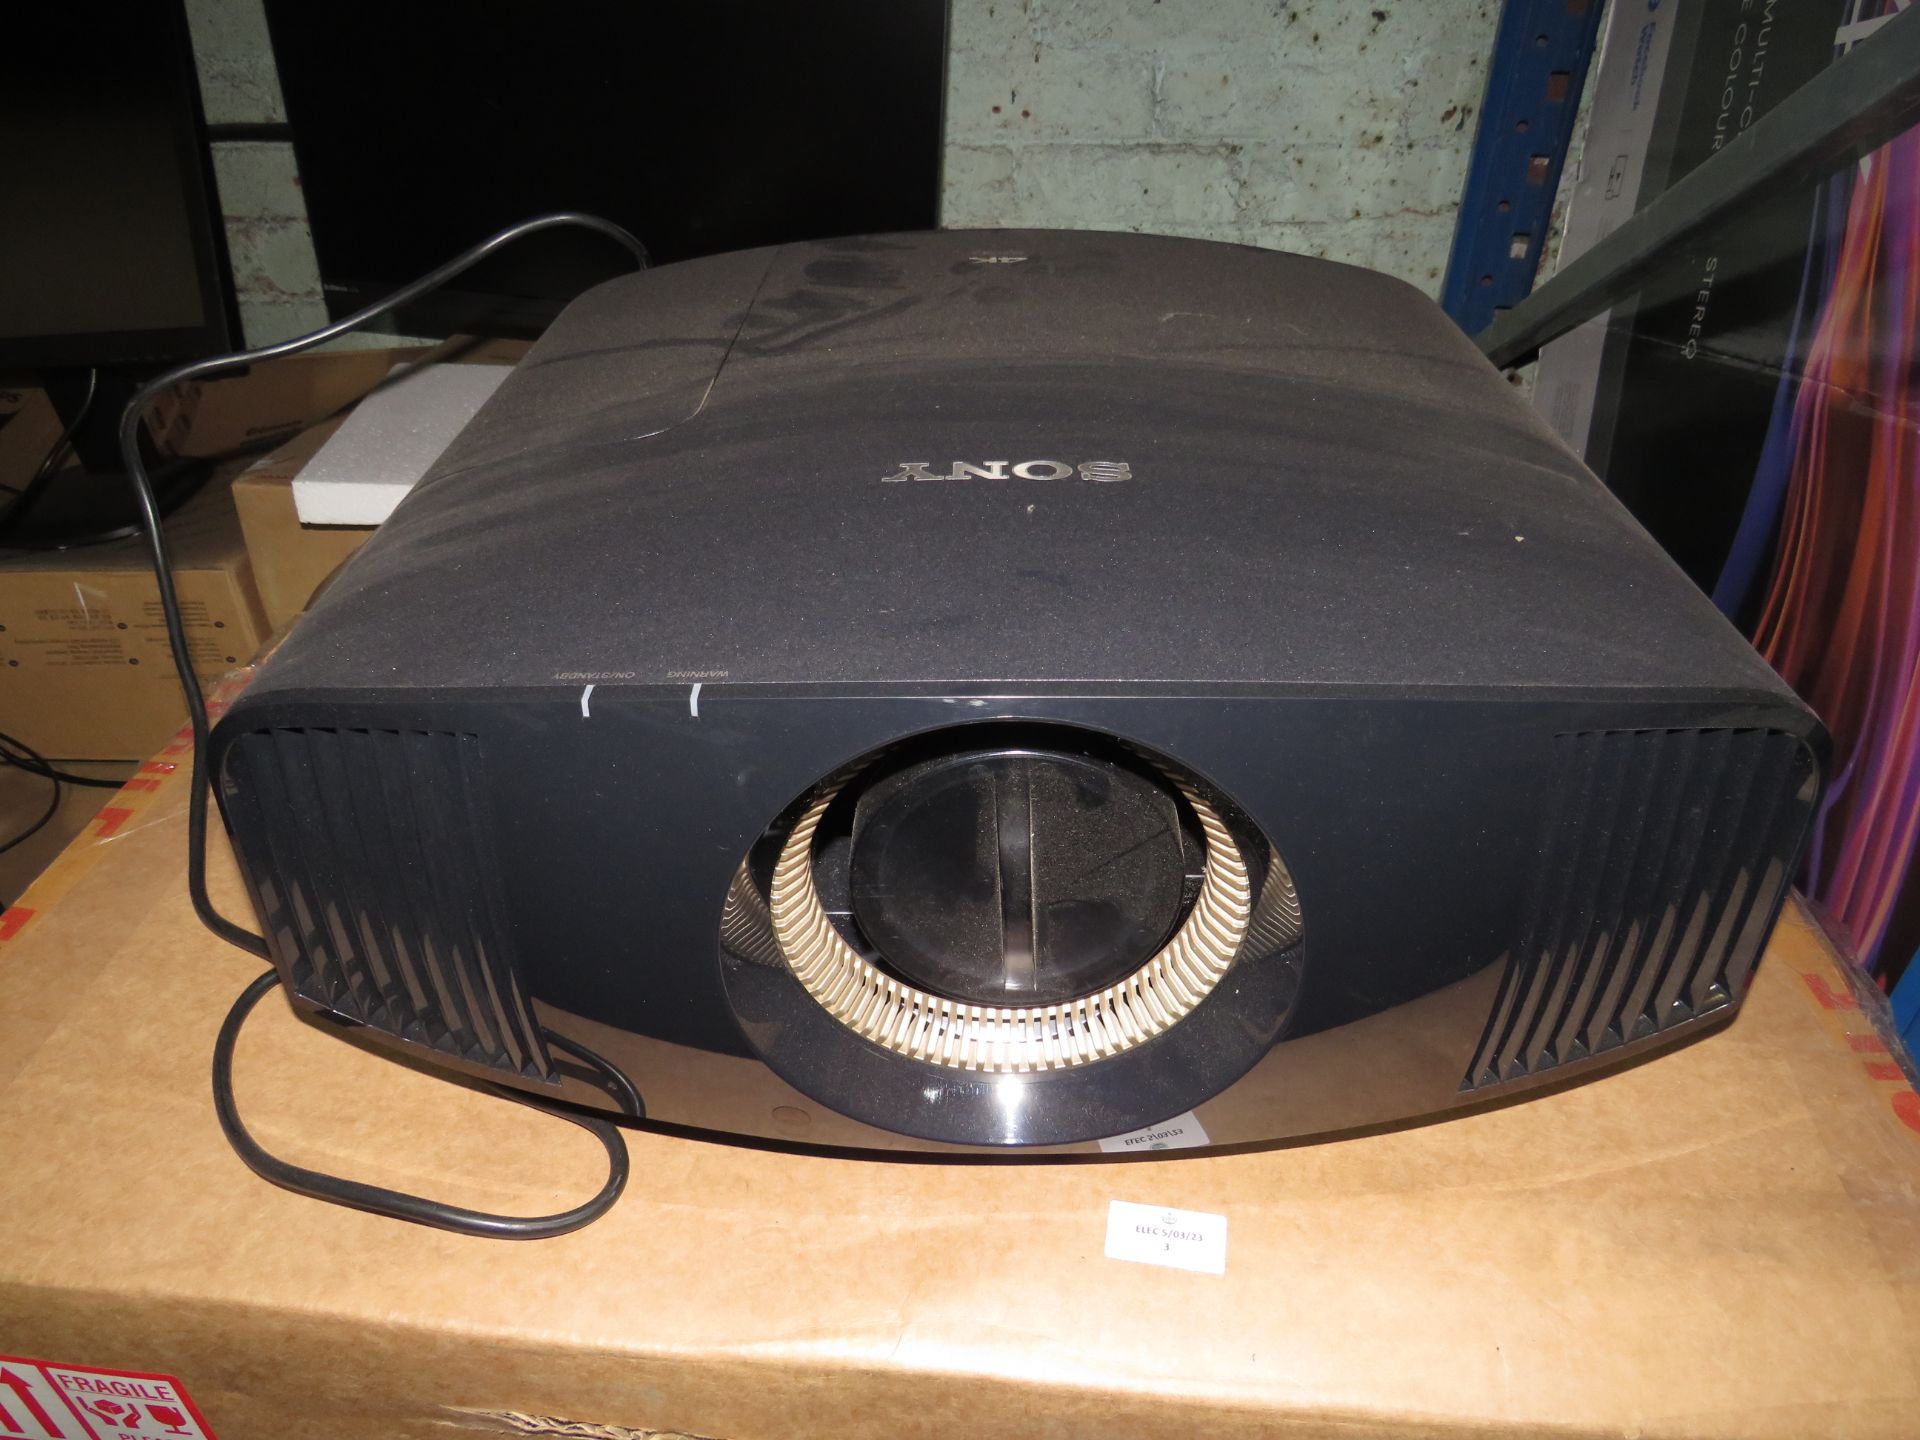 Sony Vpl-vw570es Black SXRD Projector HDR 4K HD 3D Ready powers on and projects a picture RRP ?